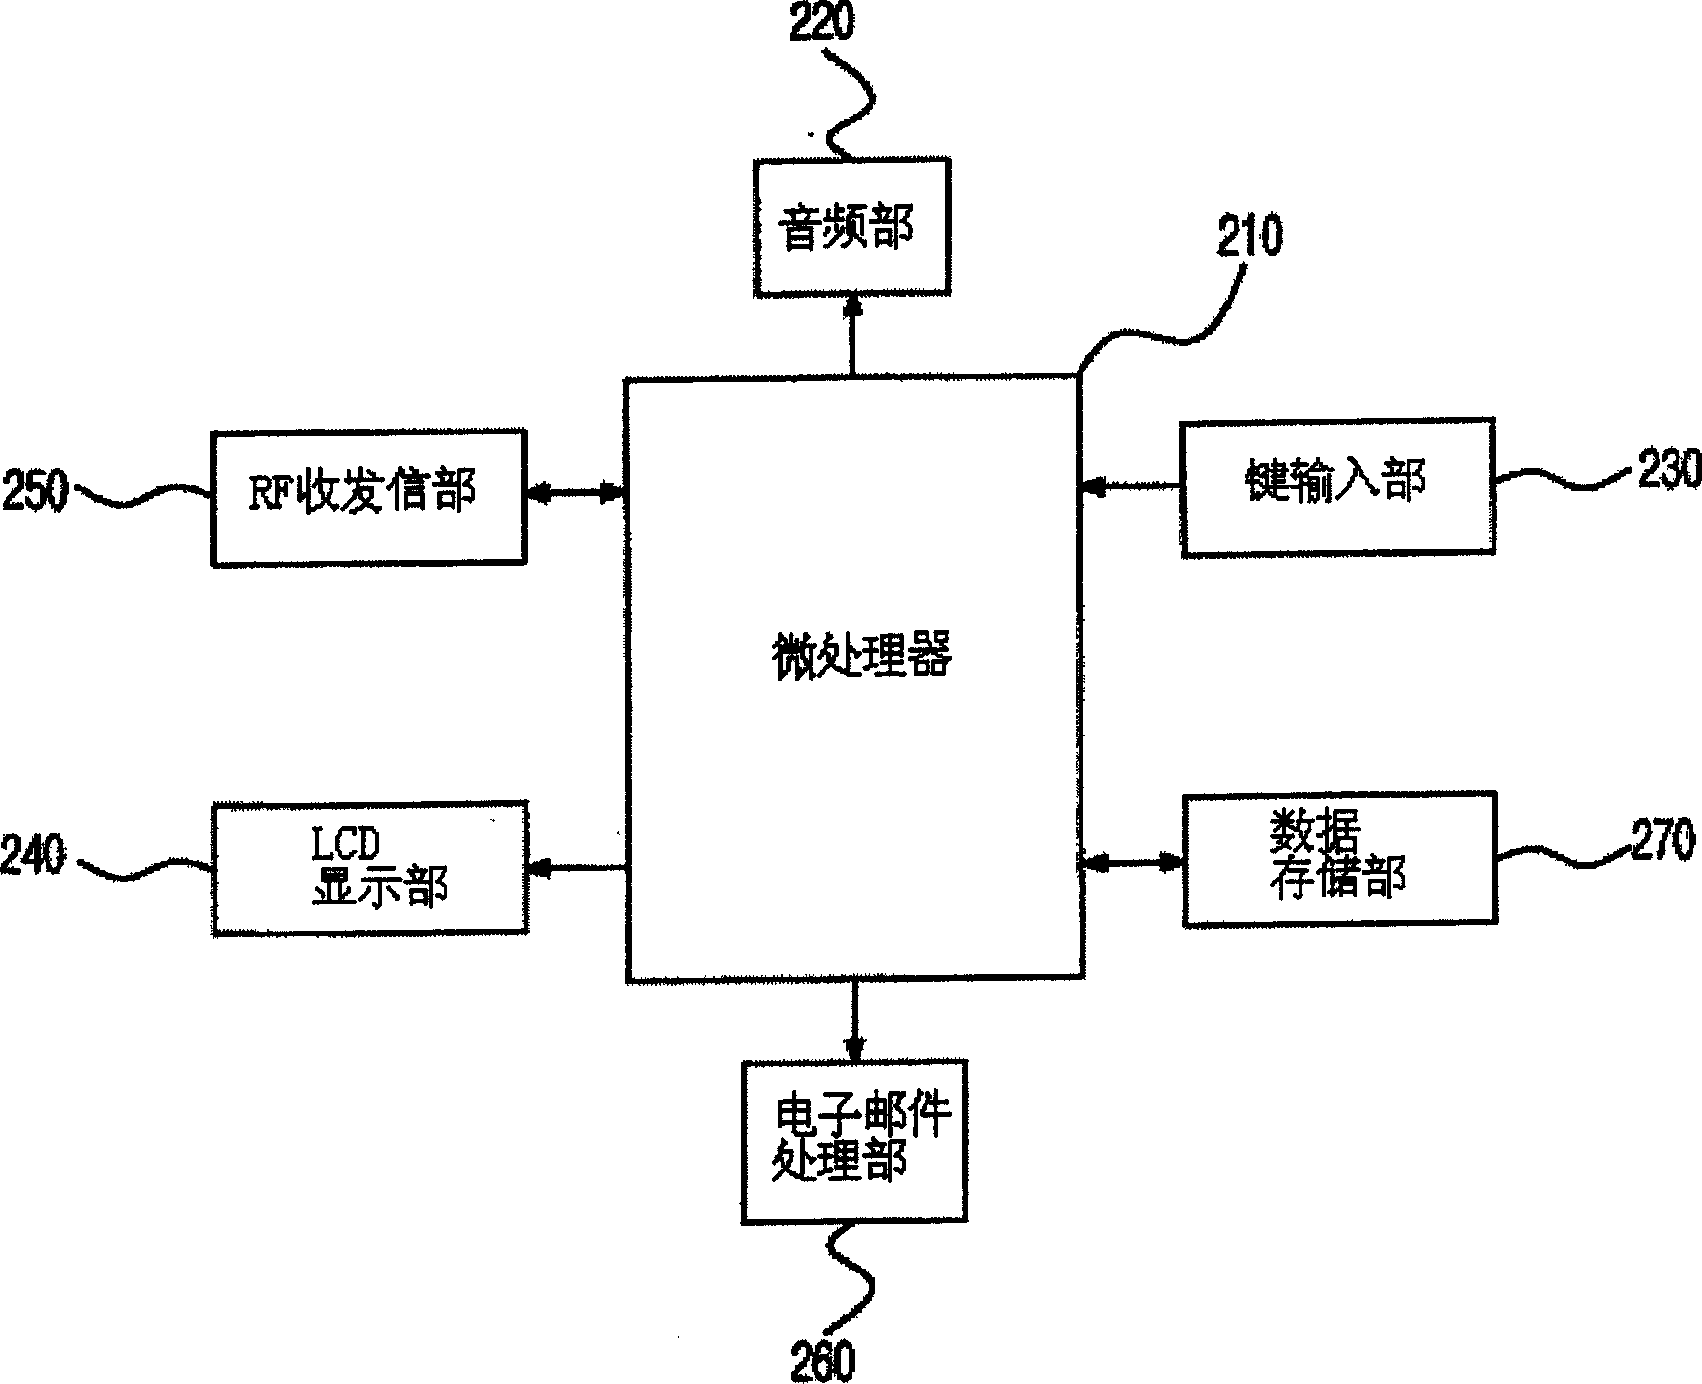 Mobile communication terminal and method for sharing e-mail address of personal computer